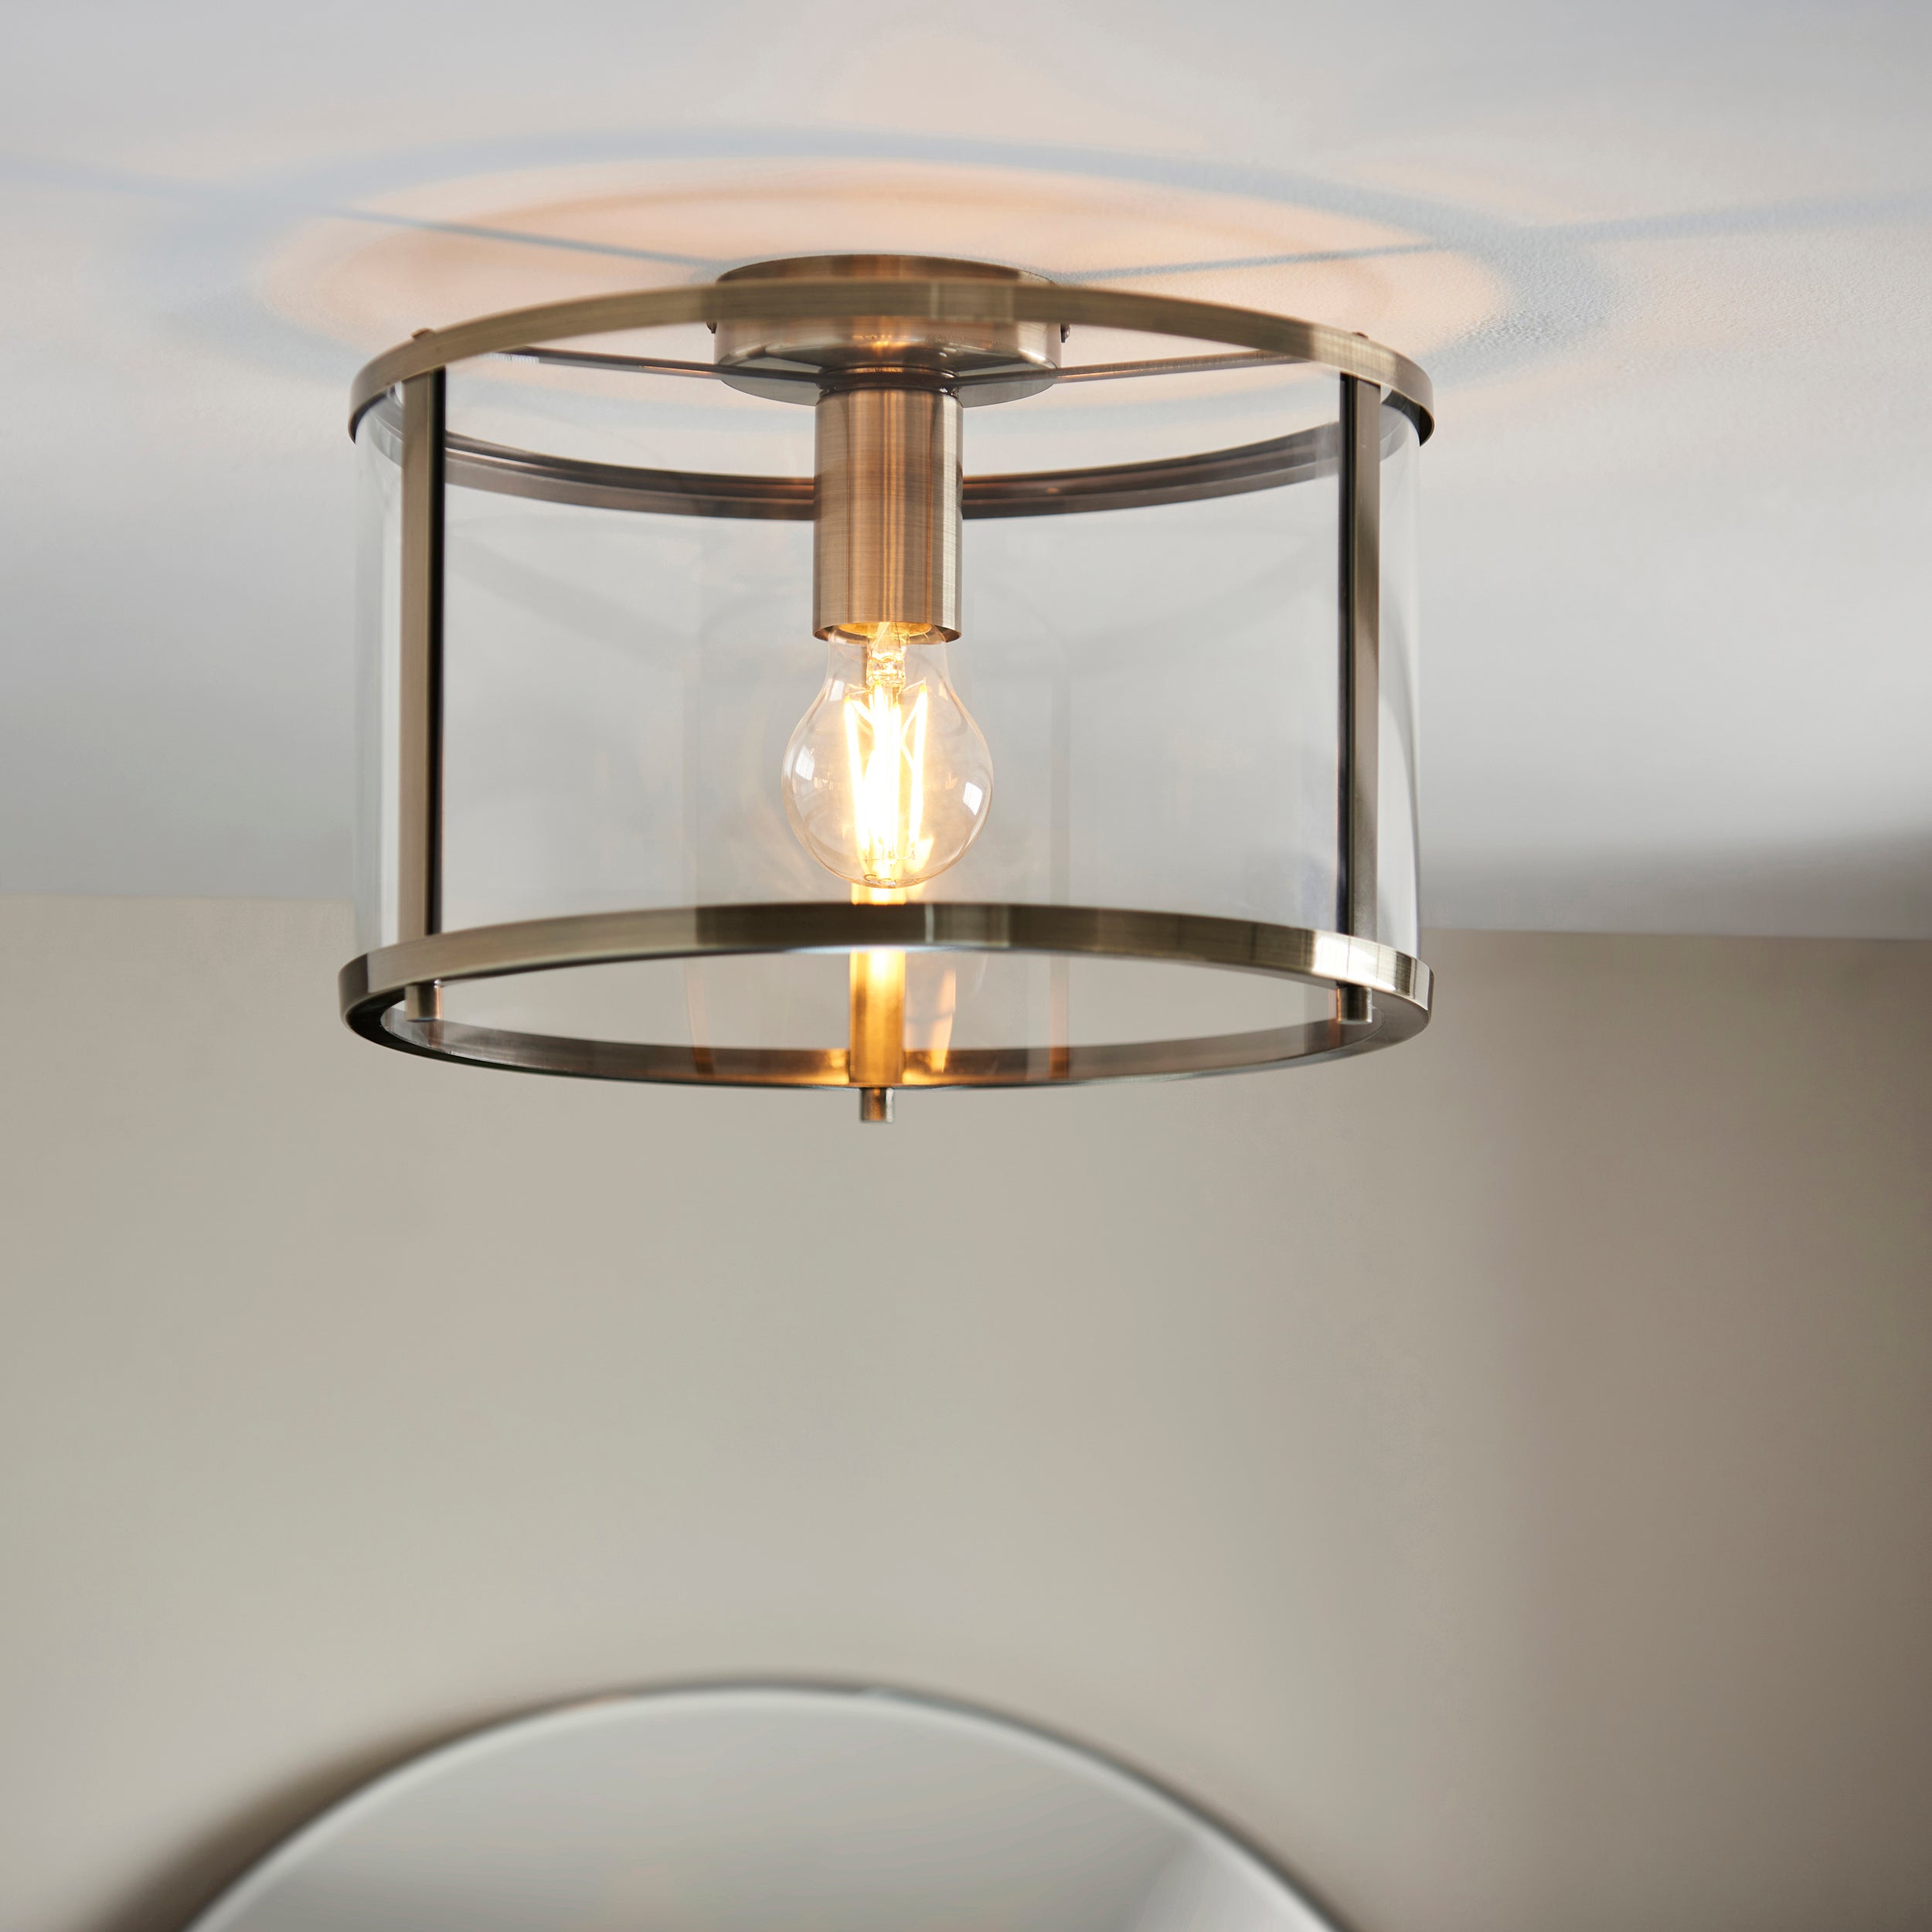 Hopton Simple Antique Brass and Glass Ceiling Light